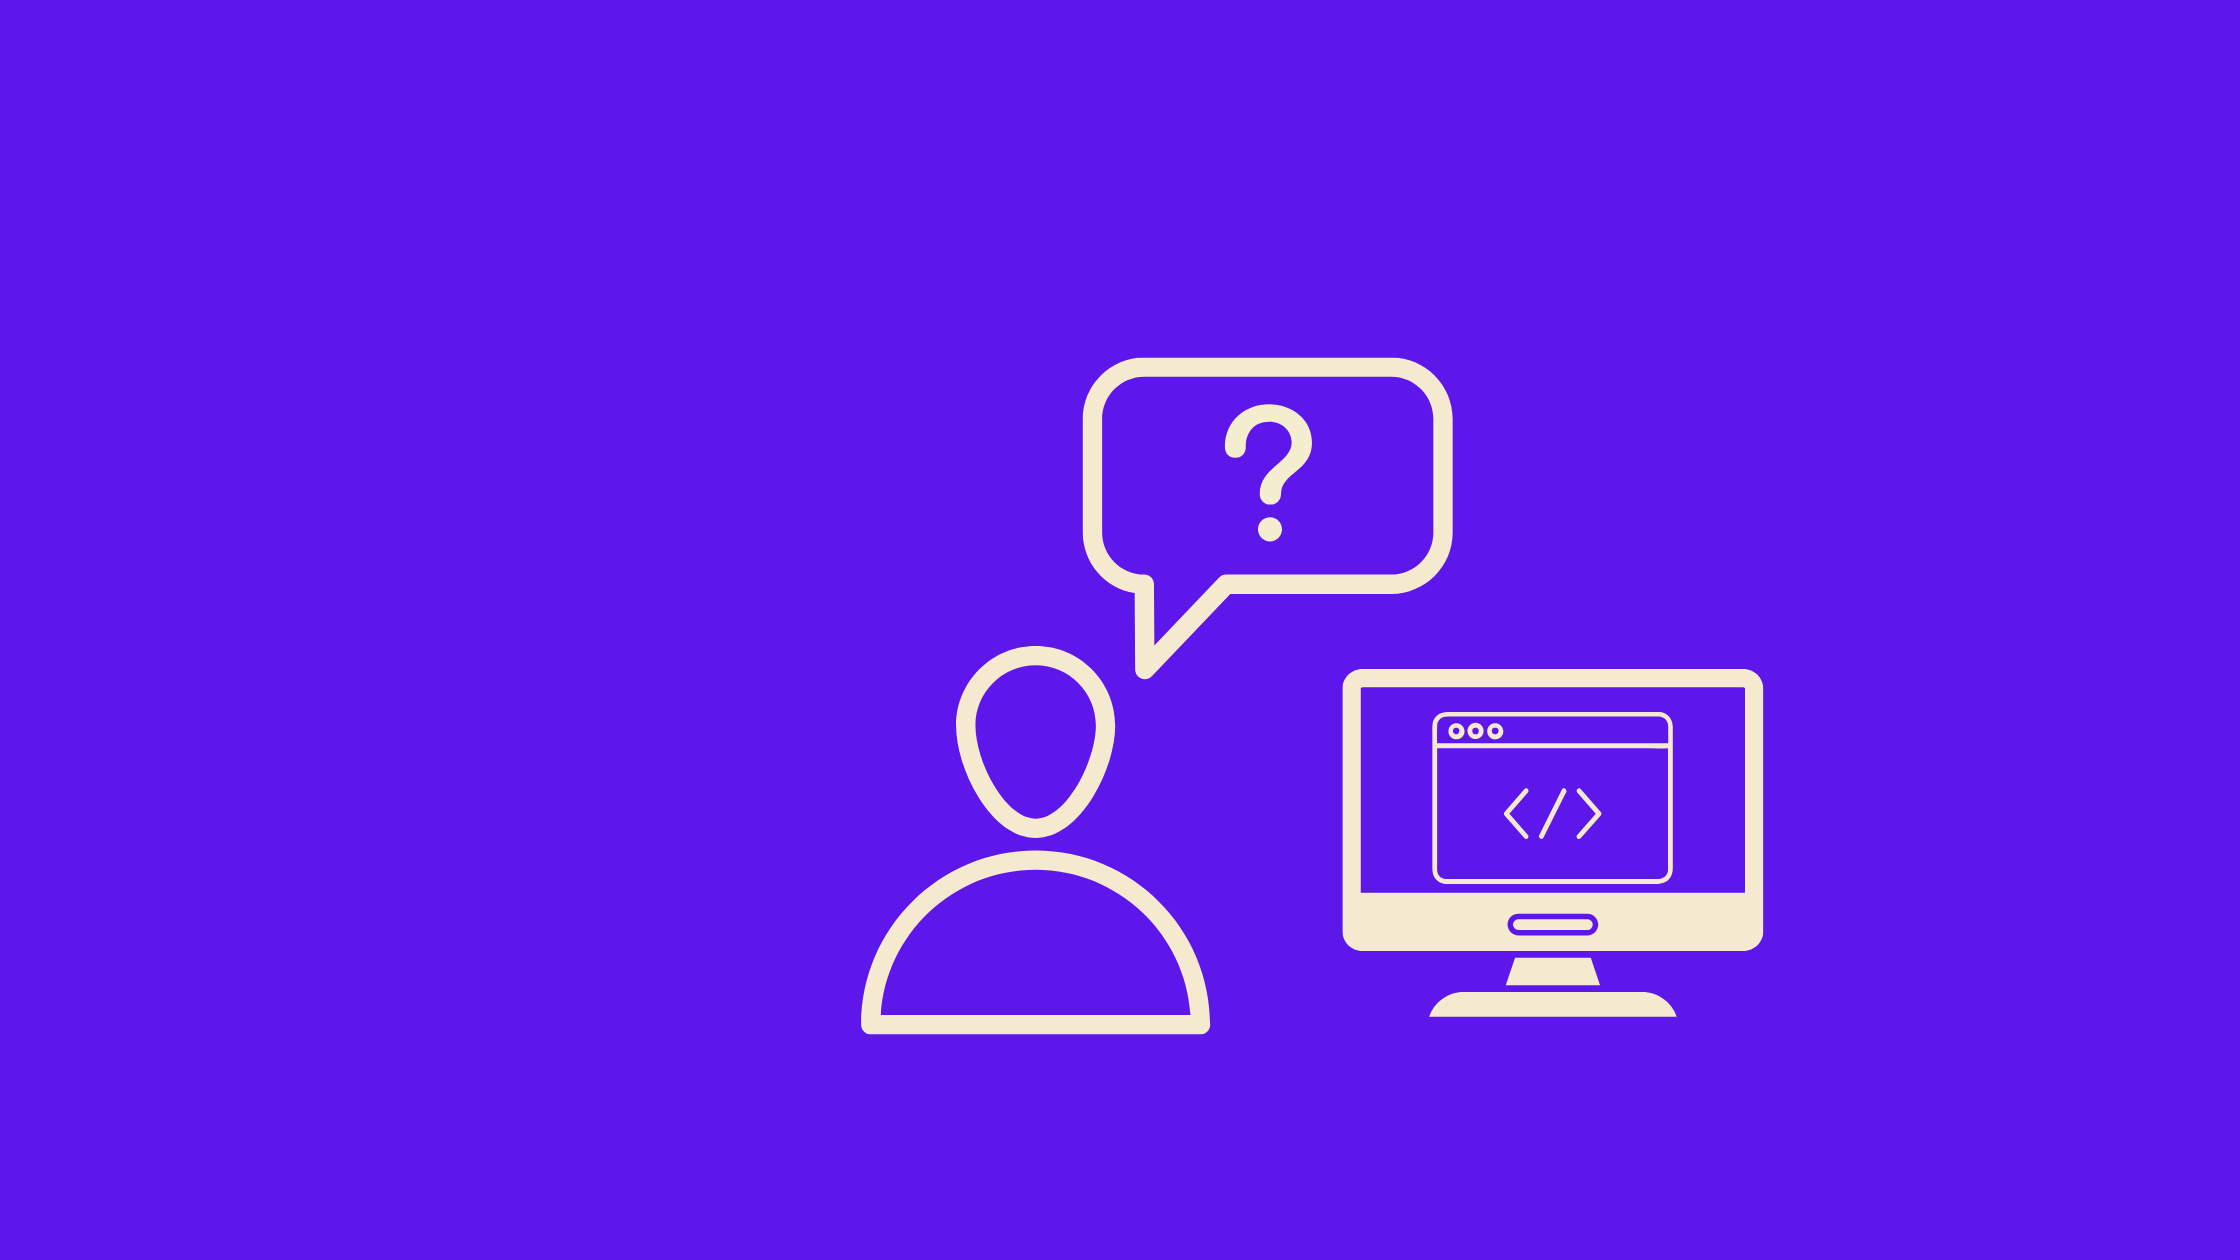 "How to build this?"  How to ask better questions as a developer